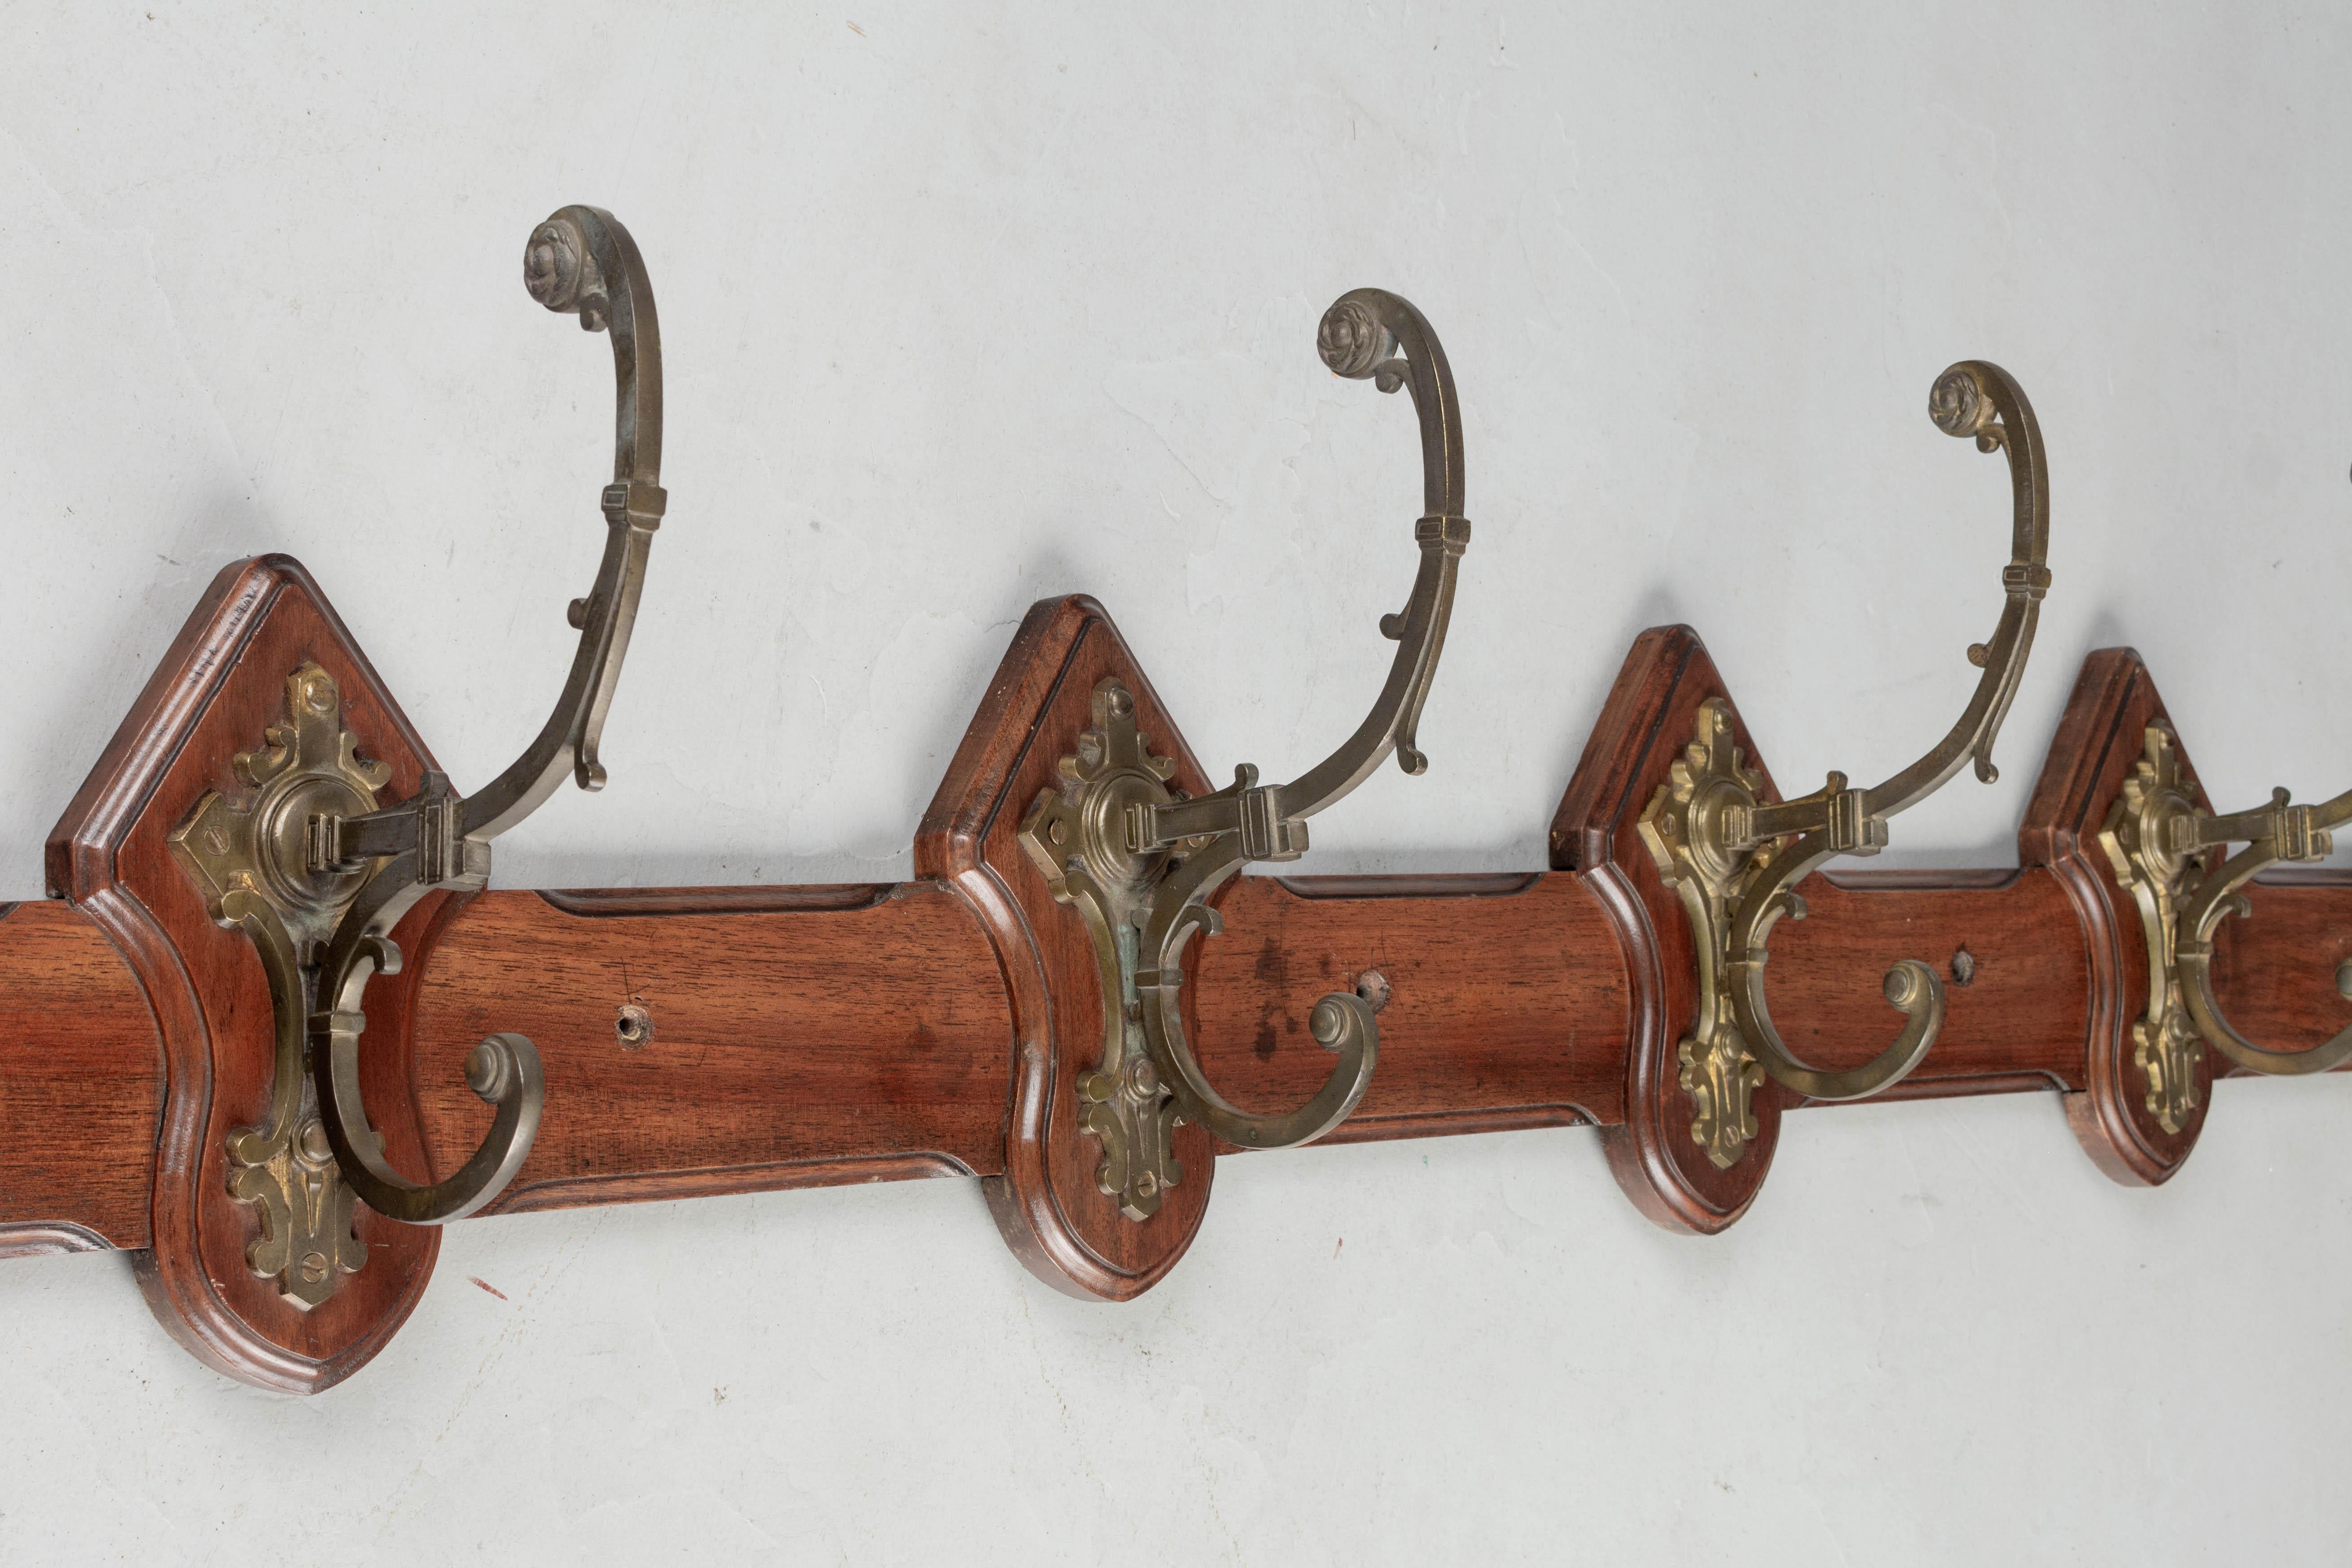 20th Century French Mahogany Porte Manteau or Coat Rack For Sale